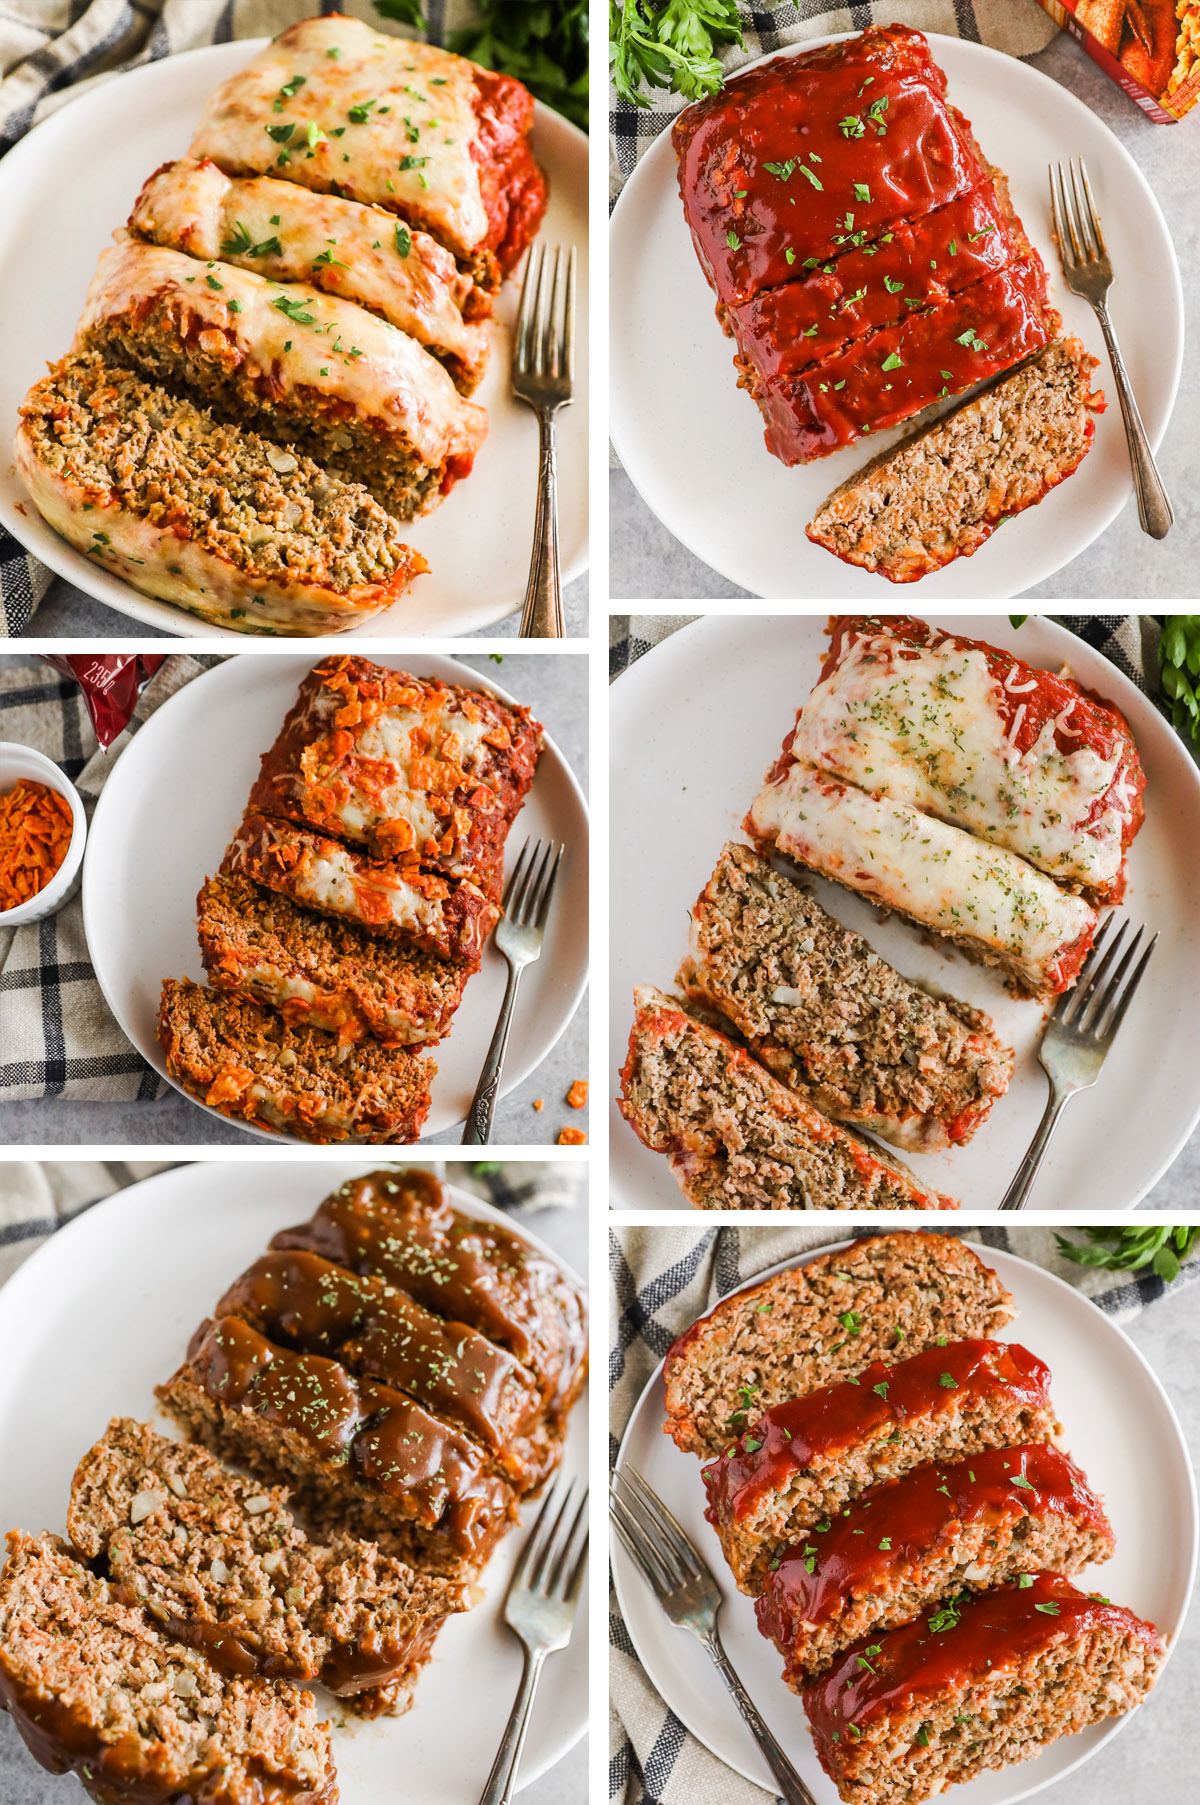 Image with six meatloaf flavor recipes including italian, classic, taco, pizza, brown gravy and stuffing.